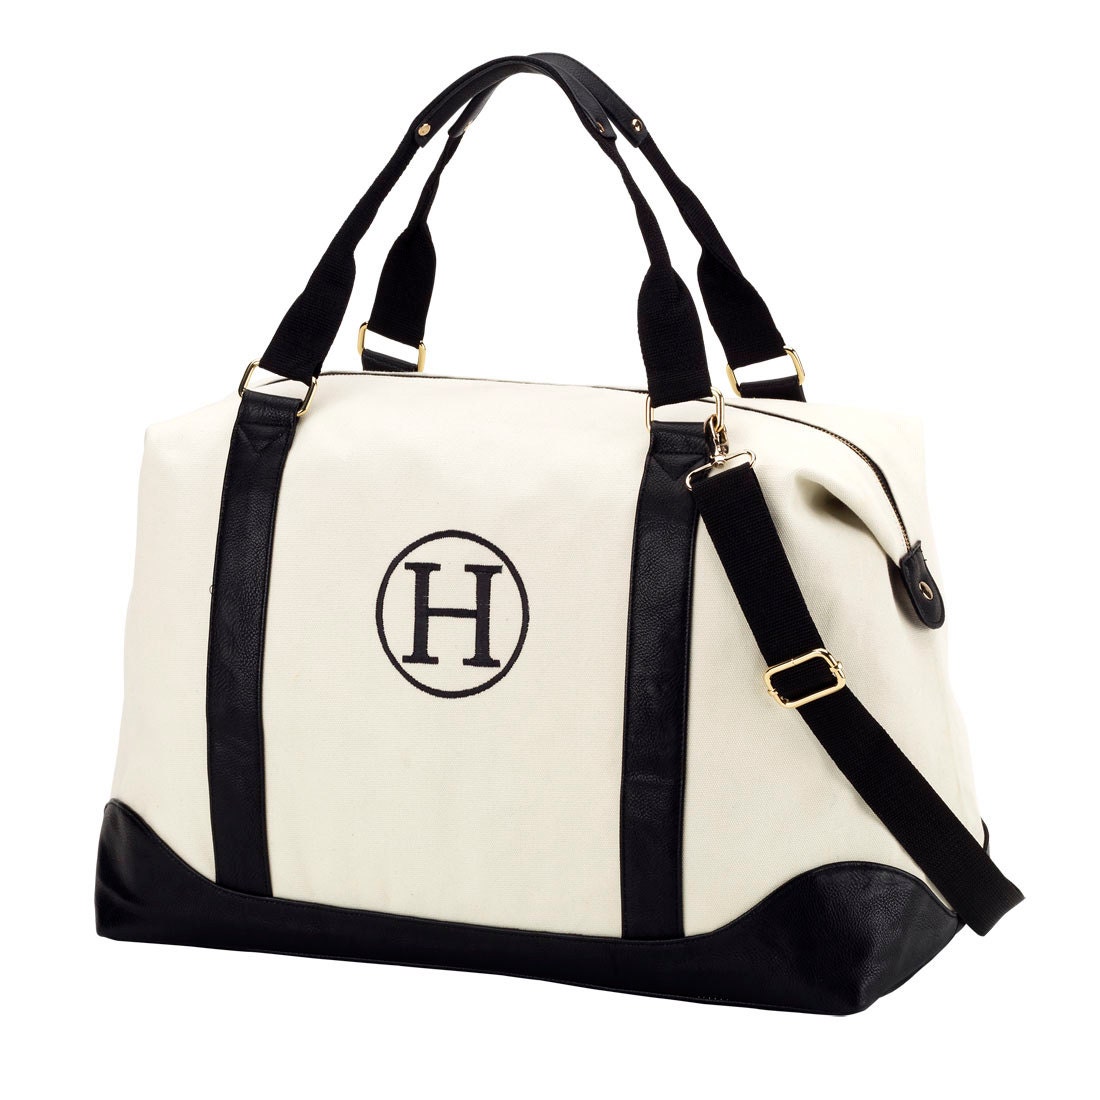 Personalized Weekender Travel Bag. Monogram by MonogramCollection